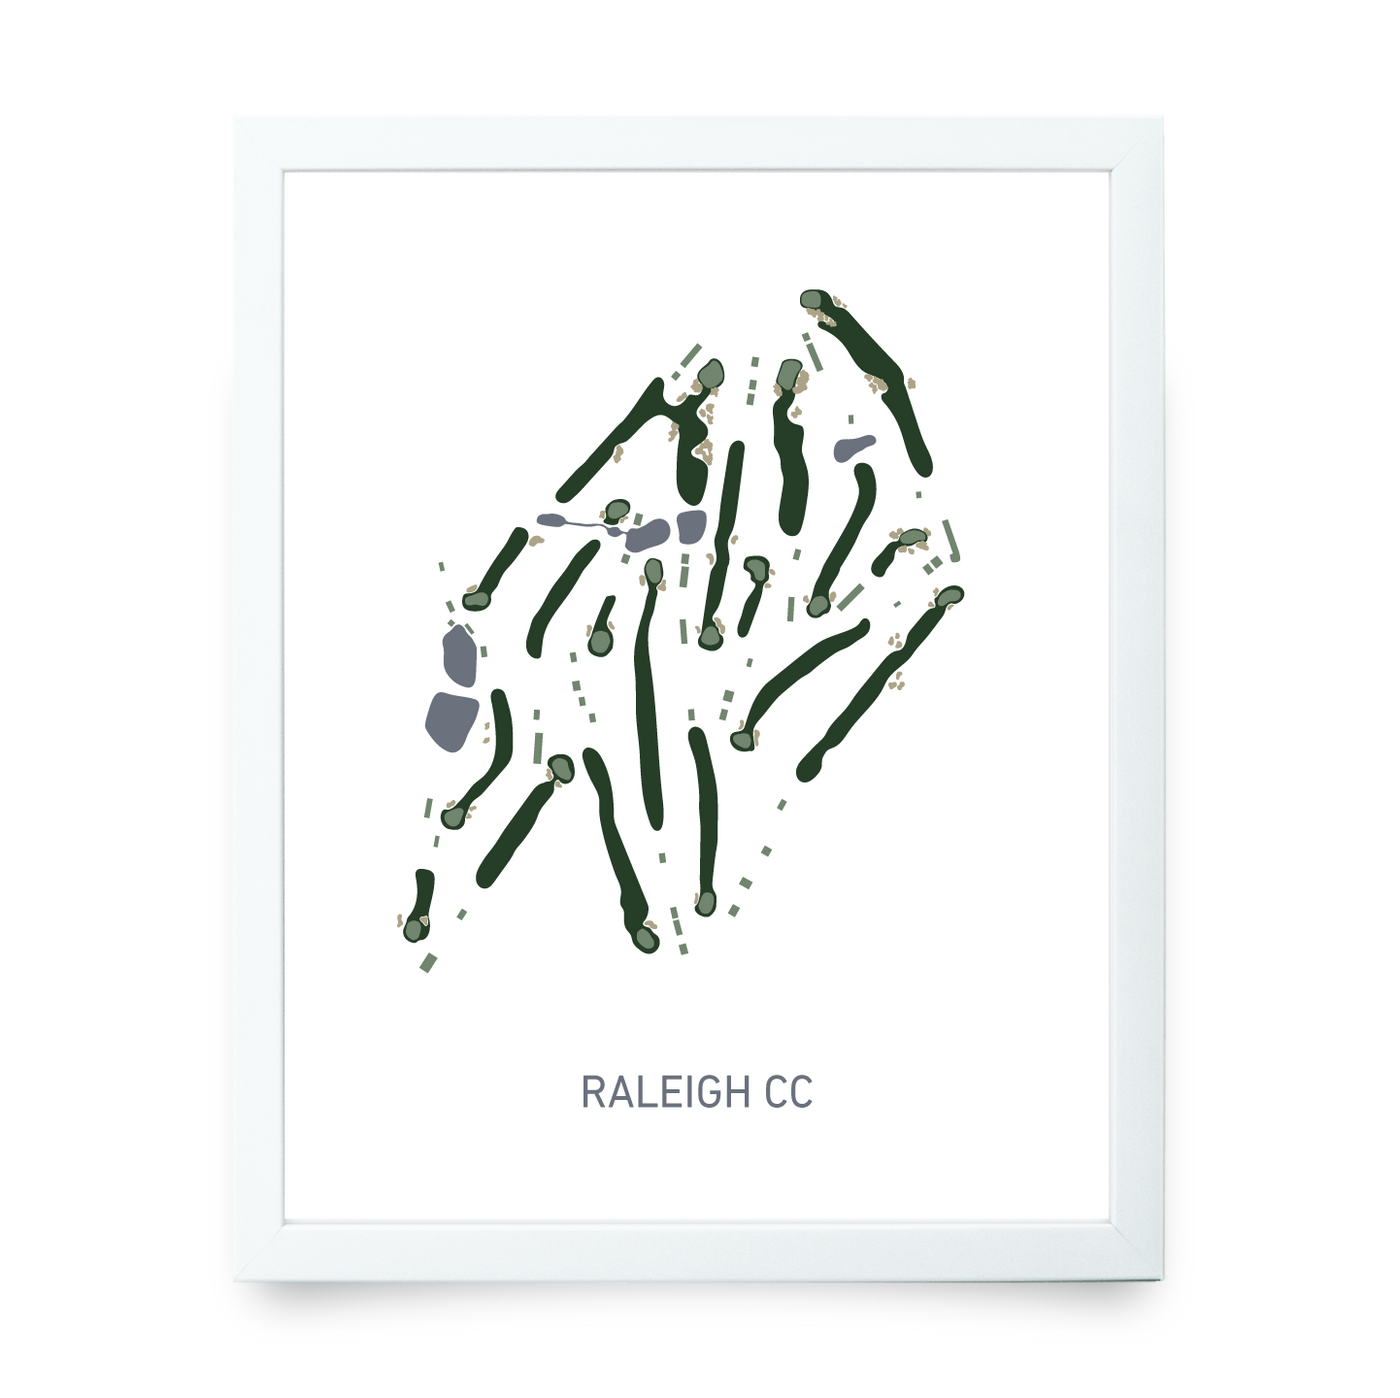 Raleigh CC (Traditional)